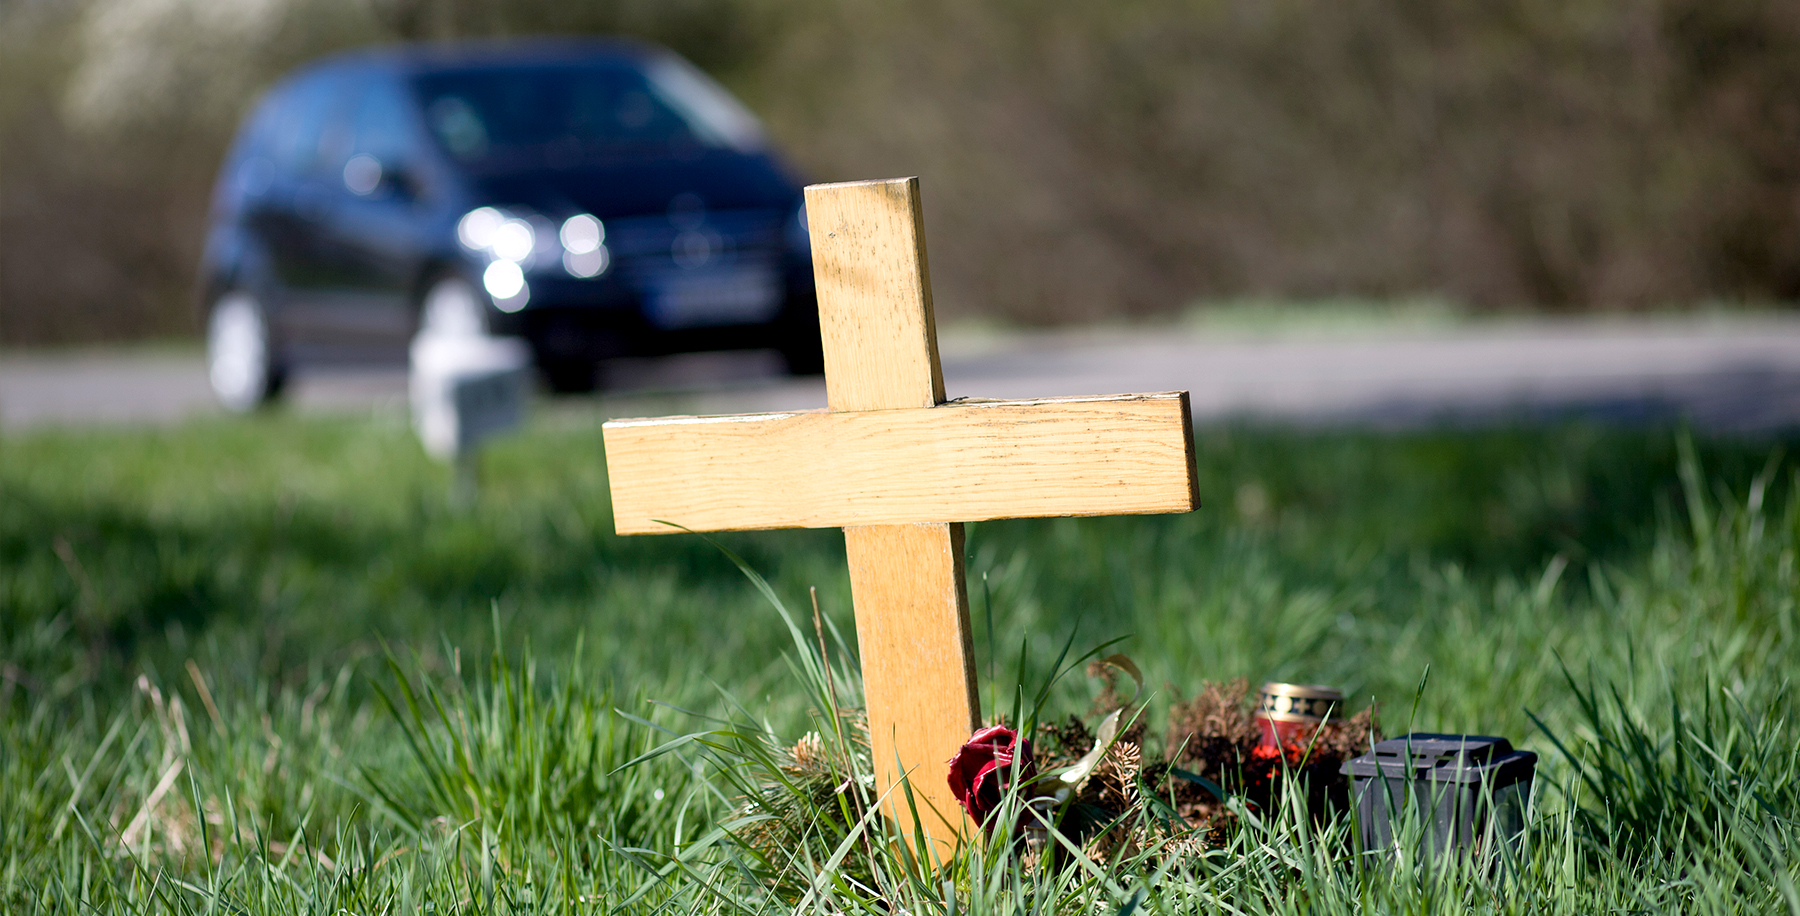 How to Determine if You Have a Wrongful Death Claim